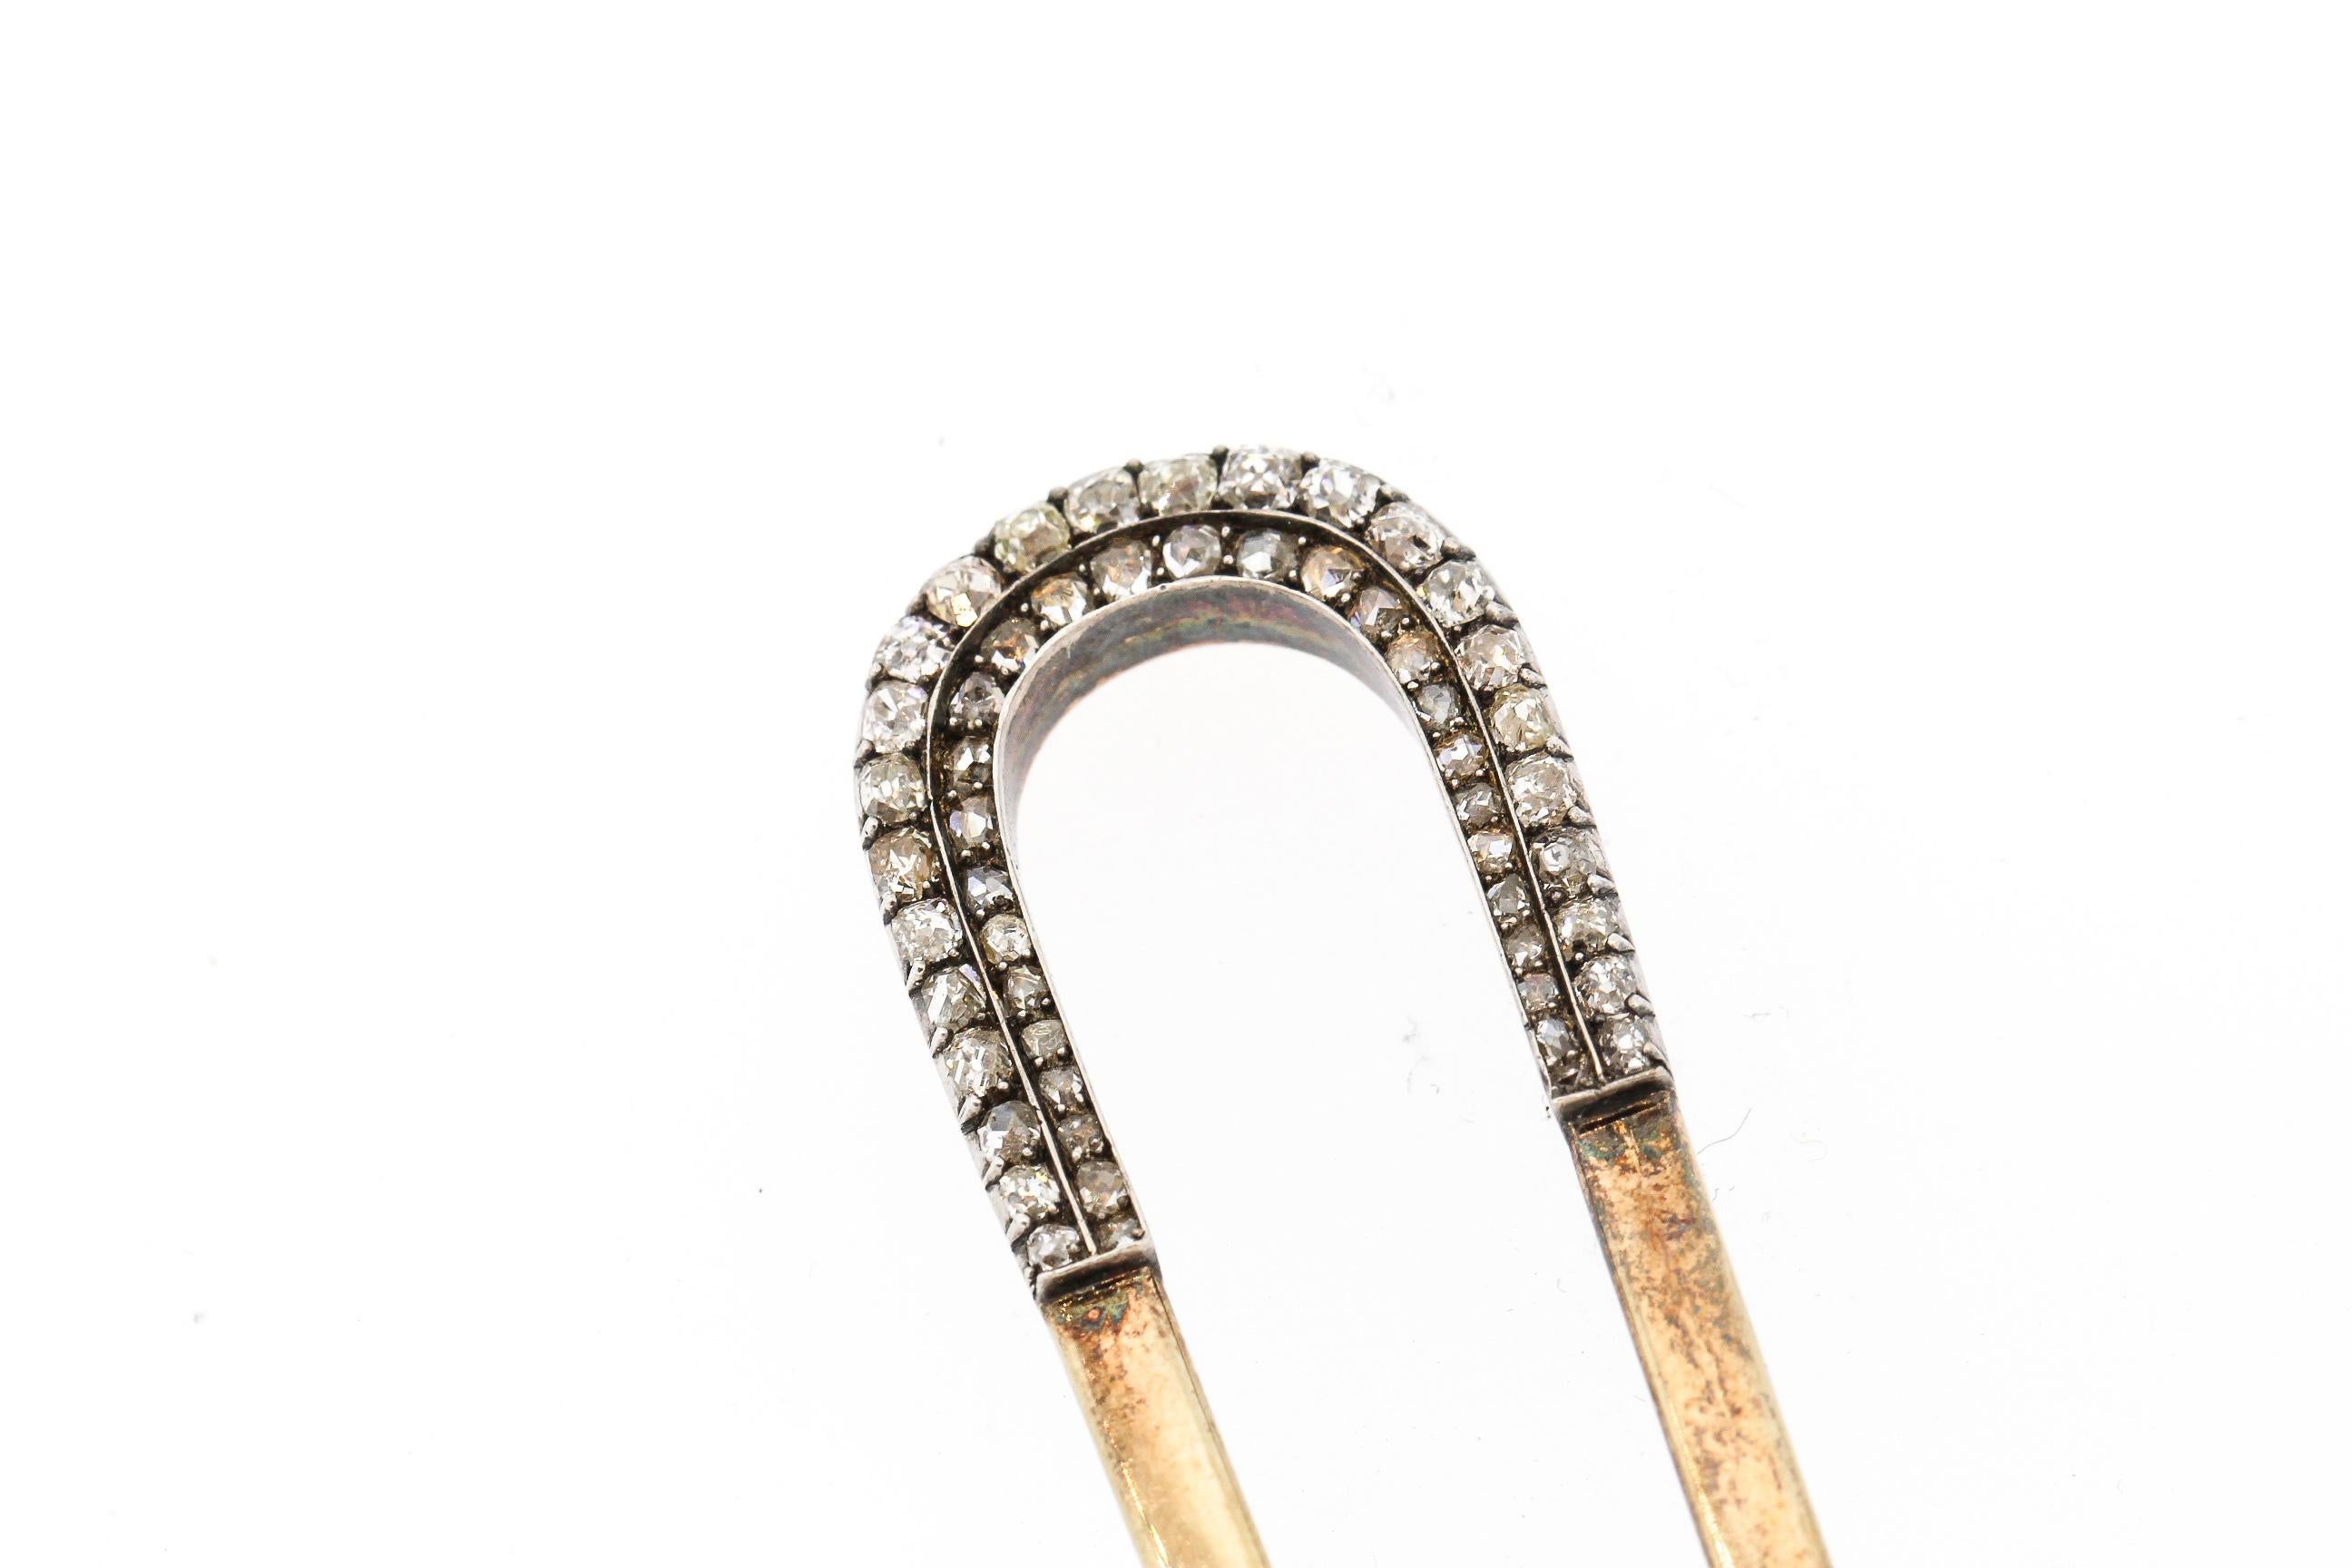 A French 18k gold and silver hair pin set with old mine cut diamonds and rose cut diamonds. What could be more chic that having a touch of sparkle peeking out from your French twist? The hair pin is set with 65 diamonds weighing about 1.75 carats.